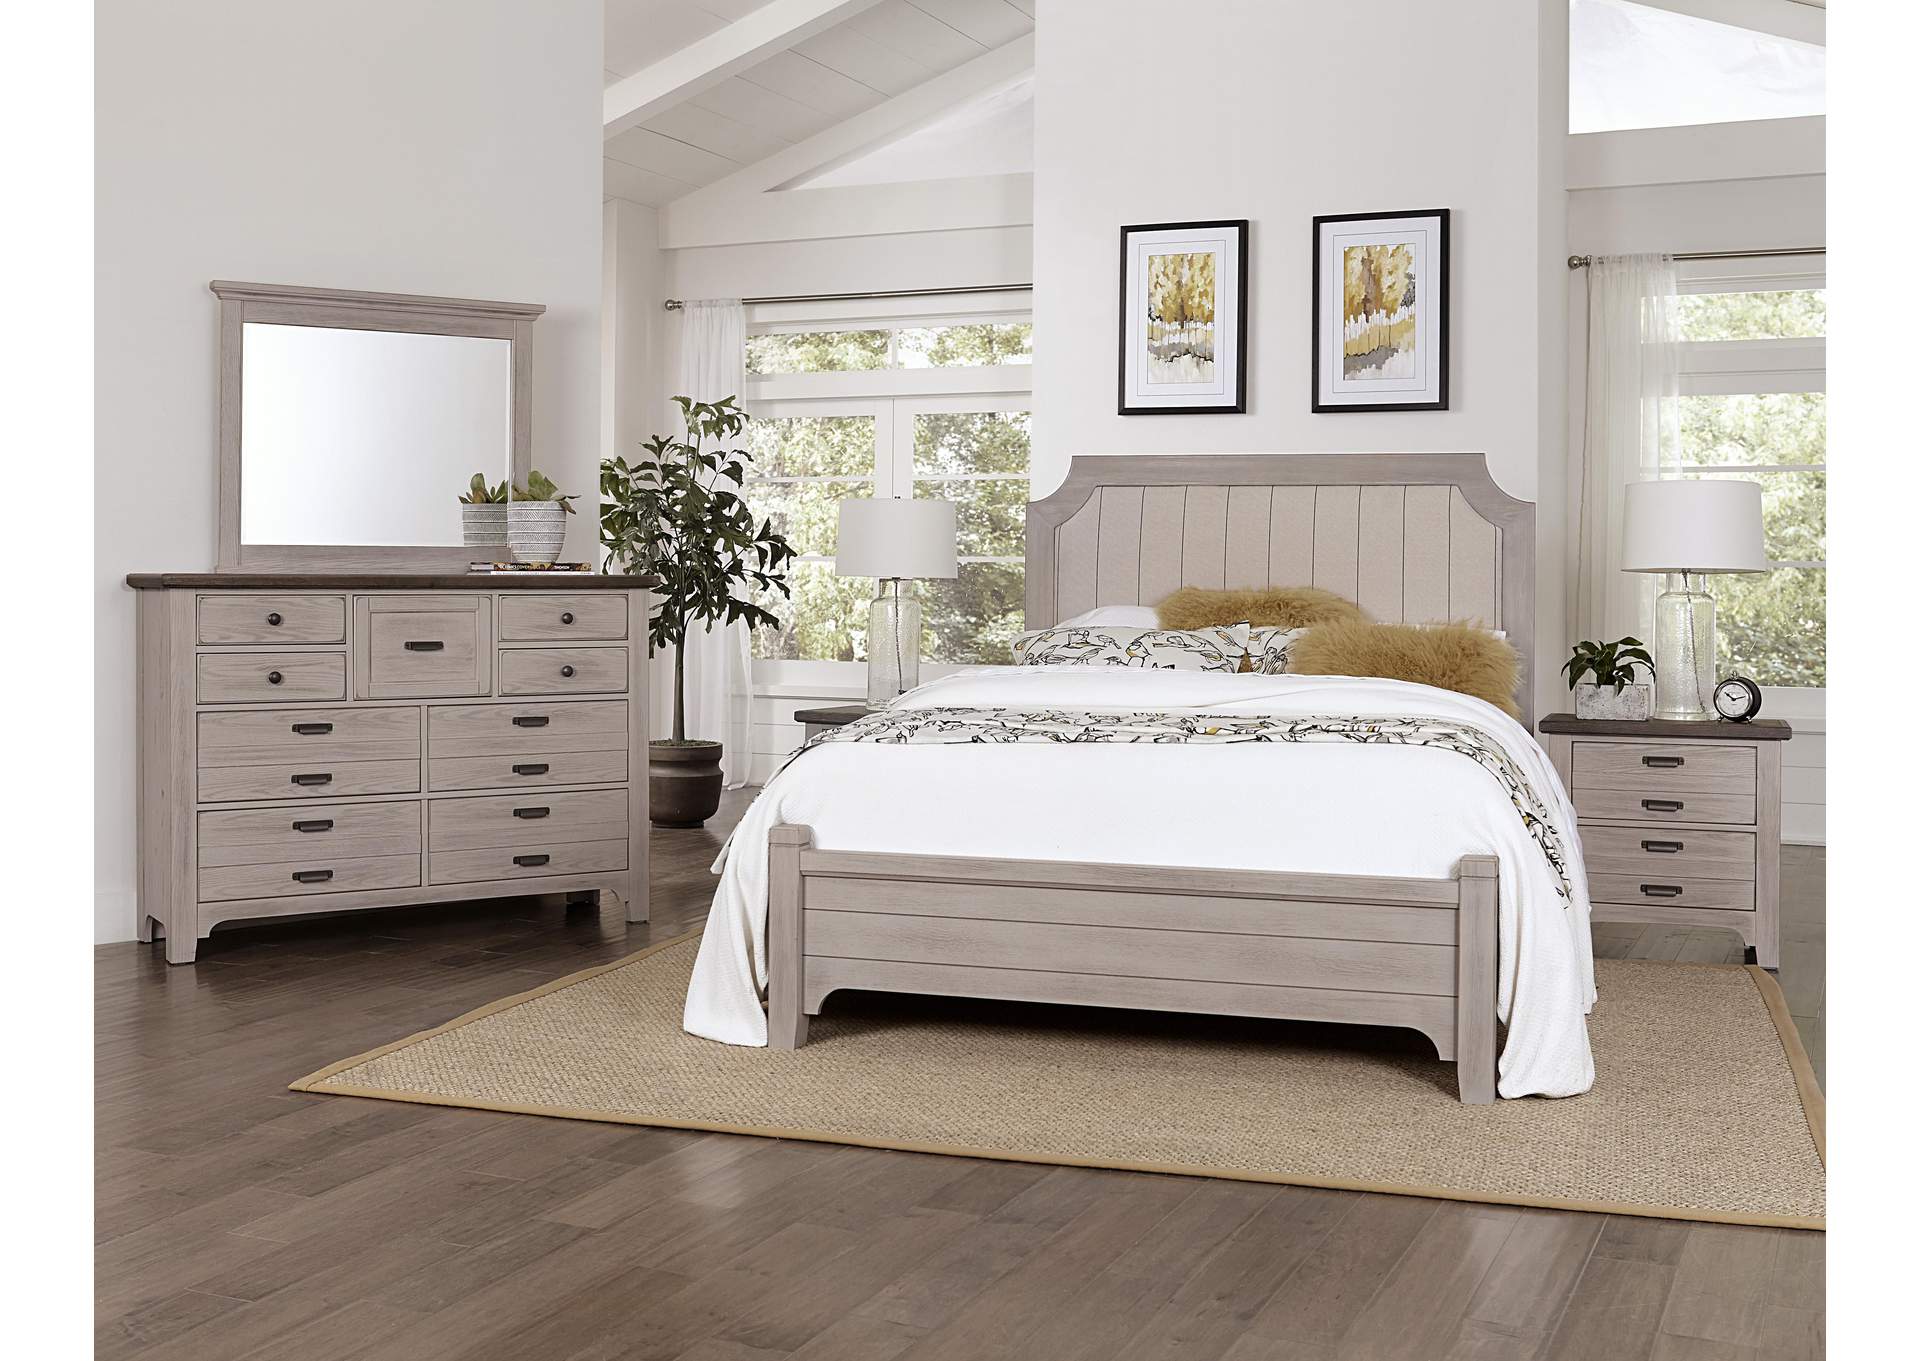 Bungalow-Dover Grey Two Tone King Upholstered Bed,Vaughan-Bassett